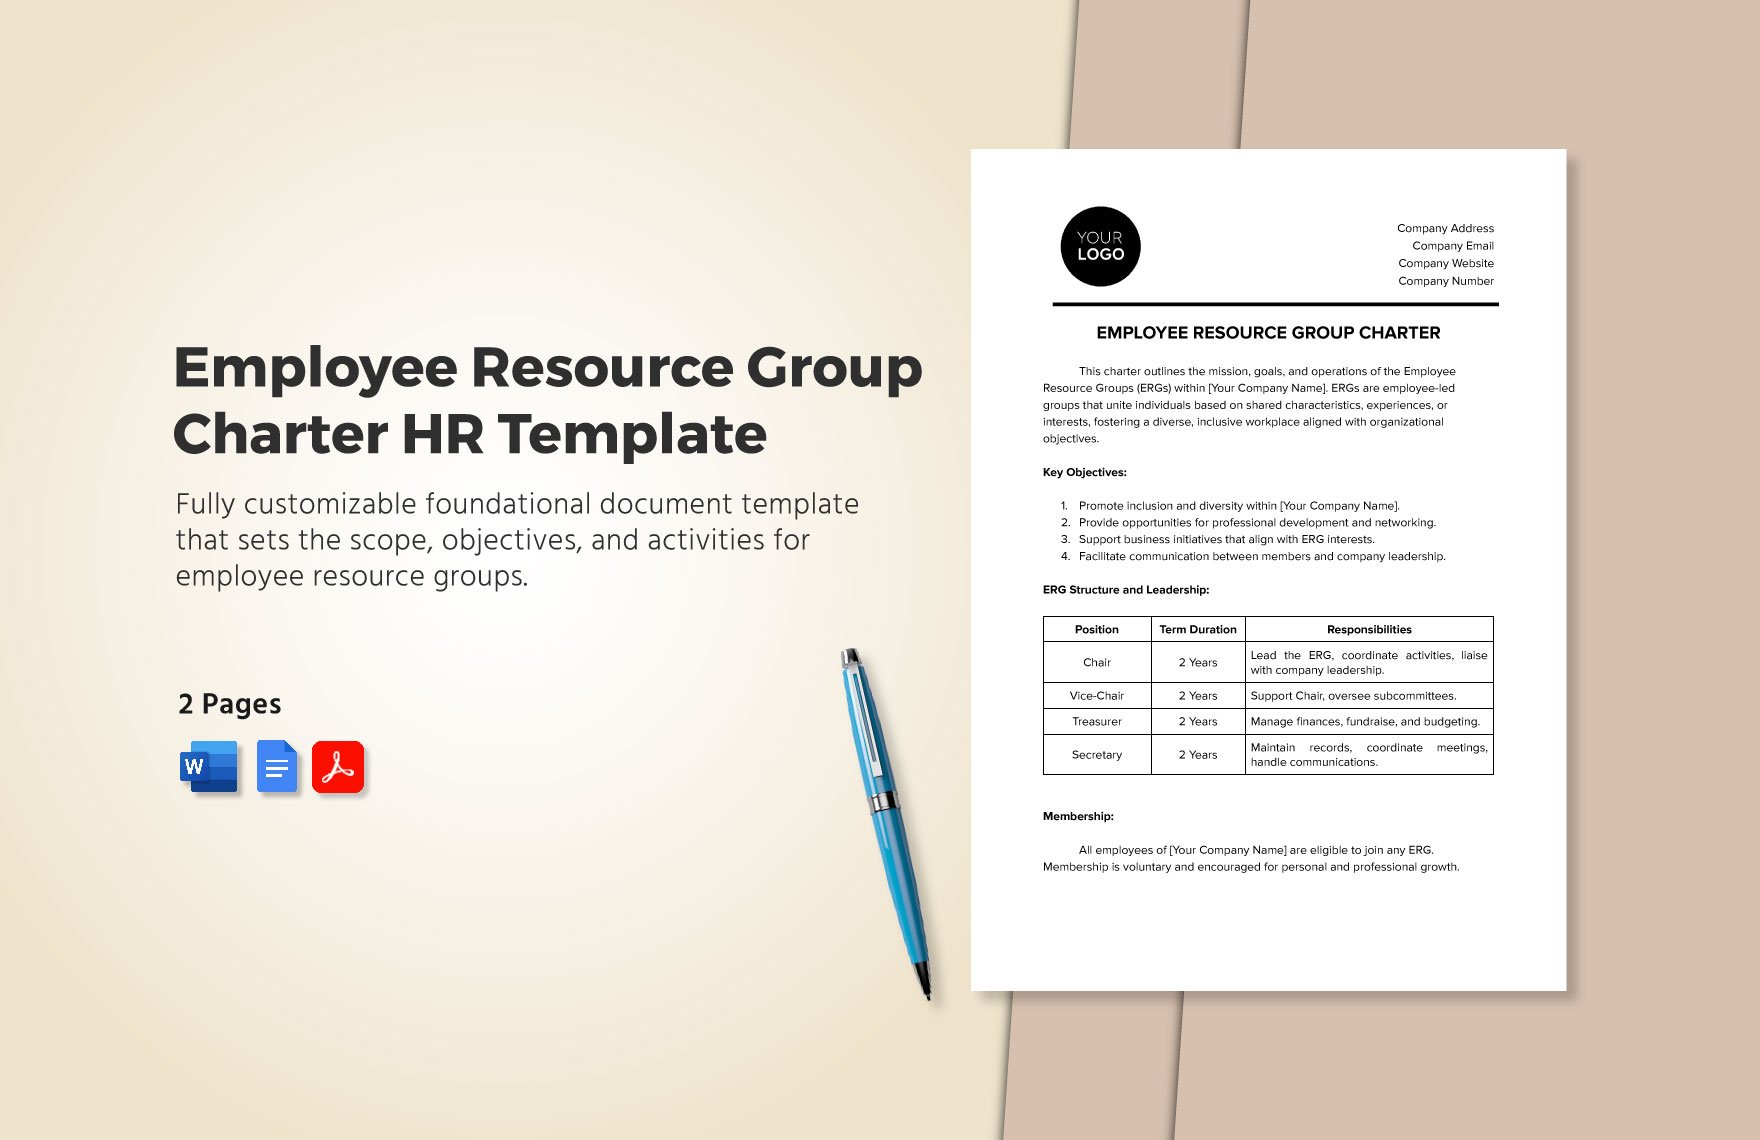 Employee Resource Group Charter HR Template in Word, Google Docs, PDF